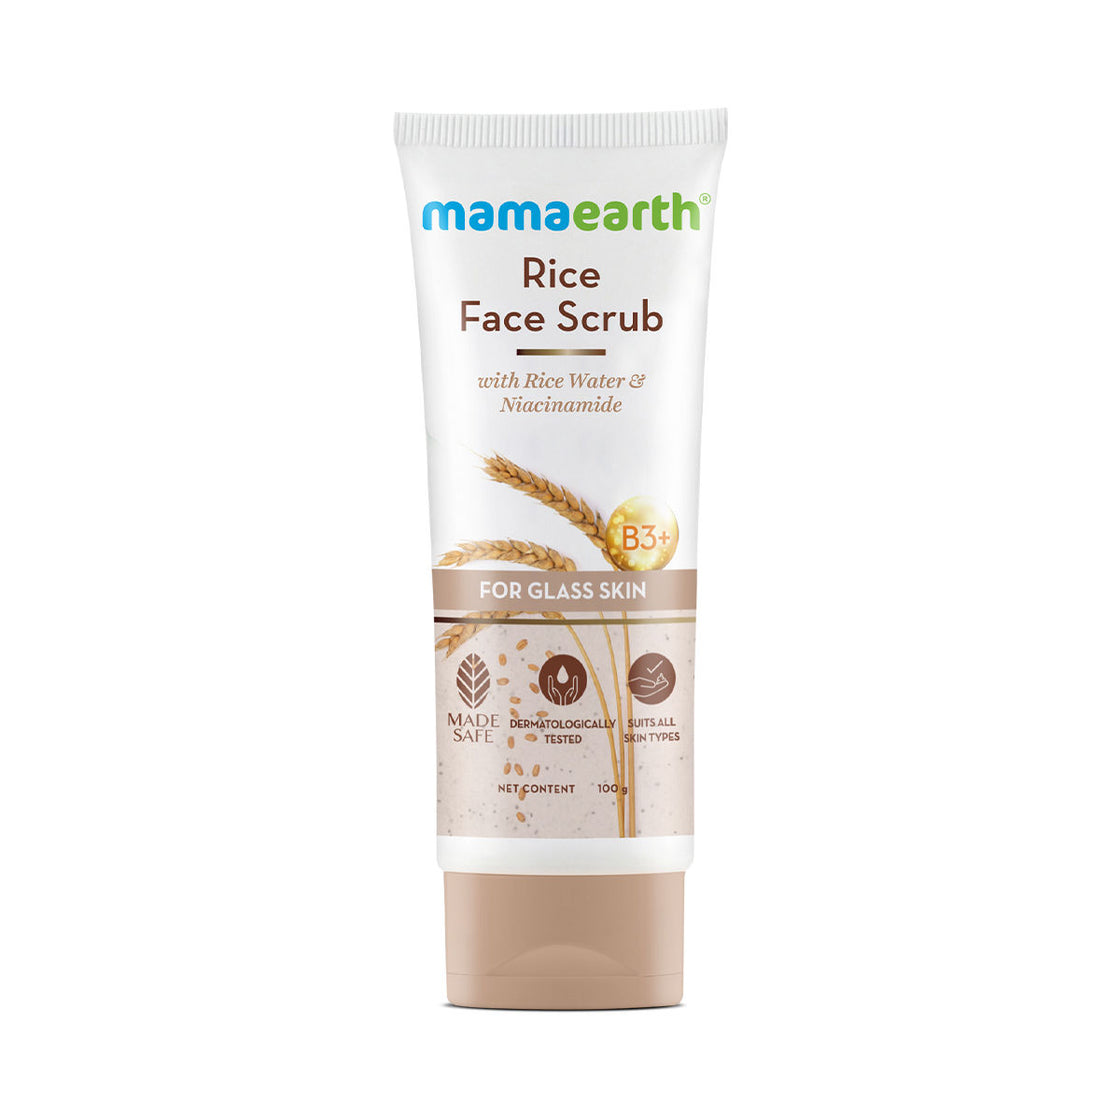 Mamaearth Rice Face Scrub For Glowing Skin With Rice Water & Niacinamide For Glass Skin-7